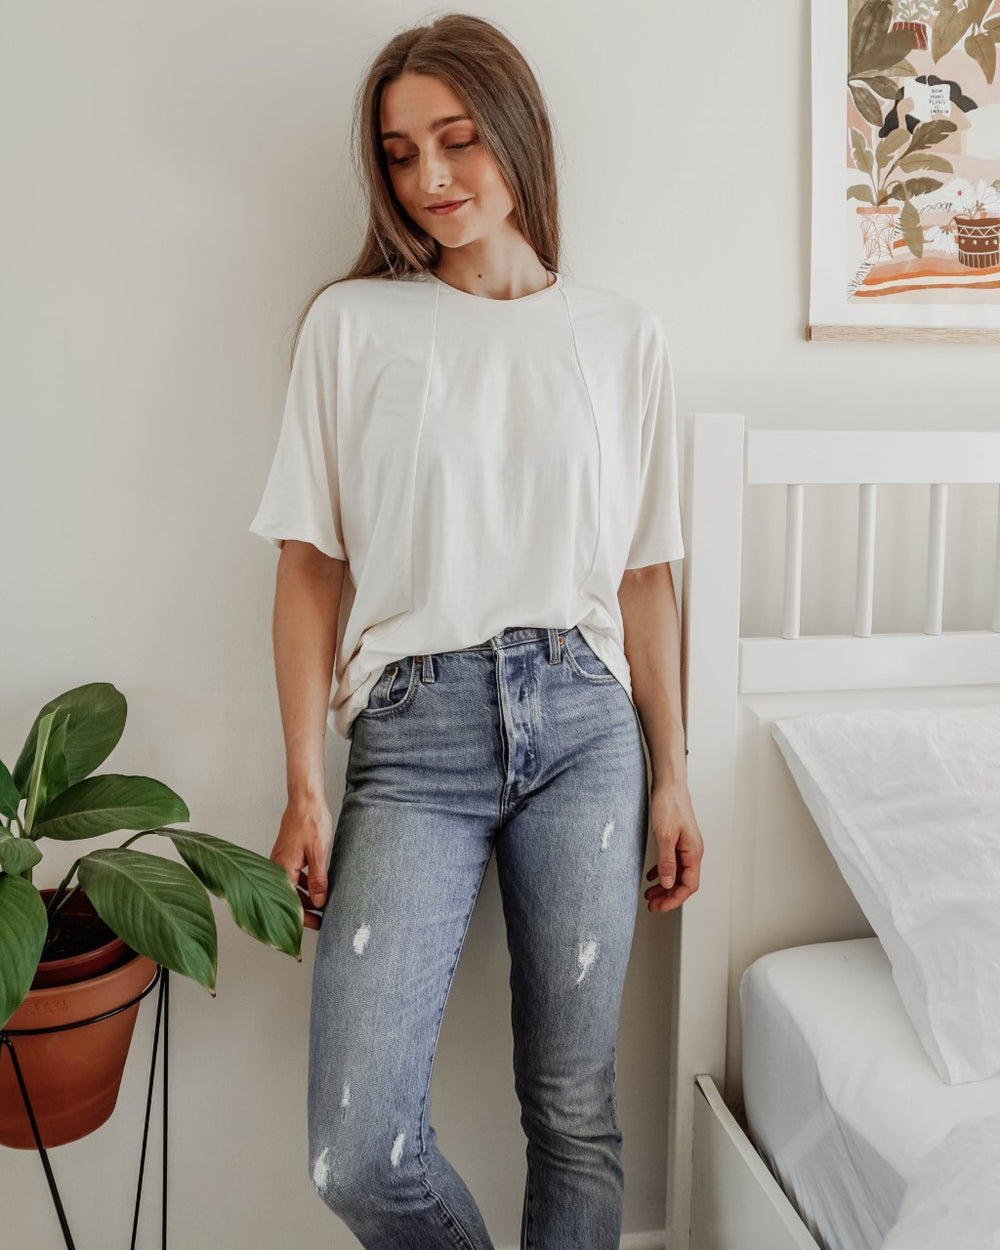 Woman wearing the Unisex Tulia Tee sewing pattern from Sewing Patterns by Masin on The Fold Line. A T-shirt pattern made in cotton jersey, viscose jersey or merino wool jersey fabrics, featuring an oversized fit, round neck, grown-on elbow length sleeves 